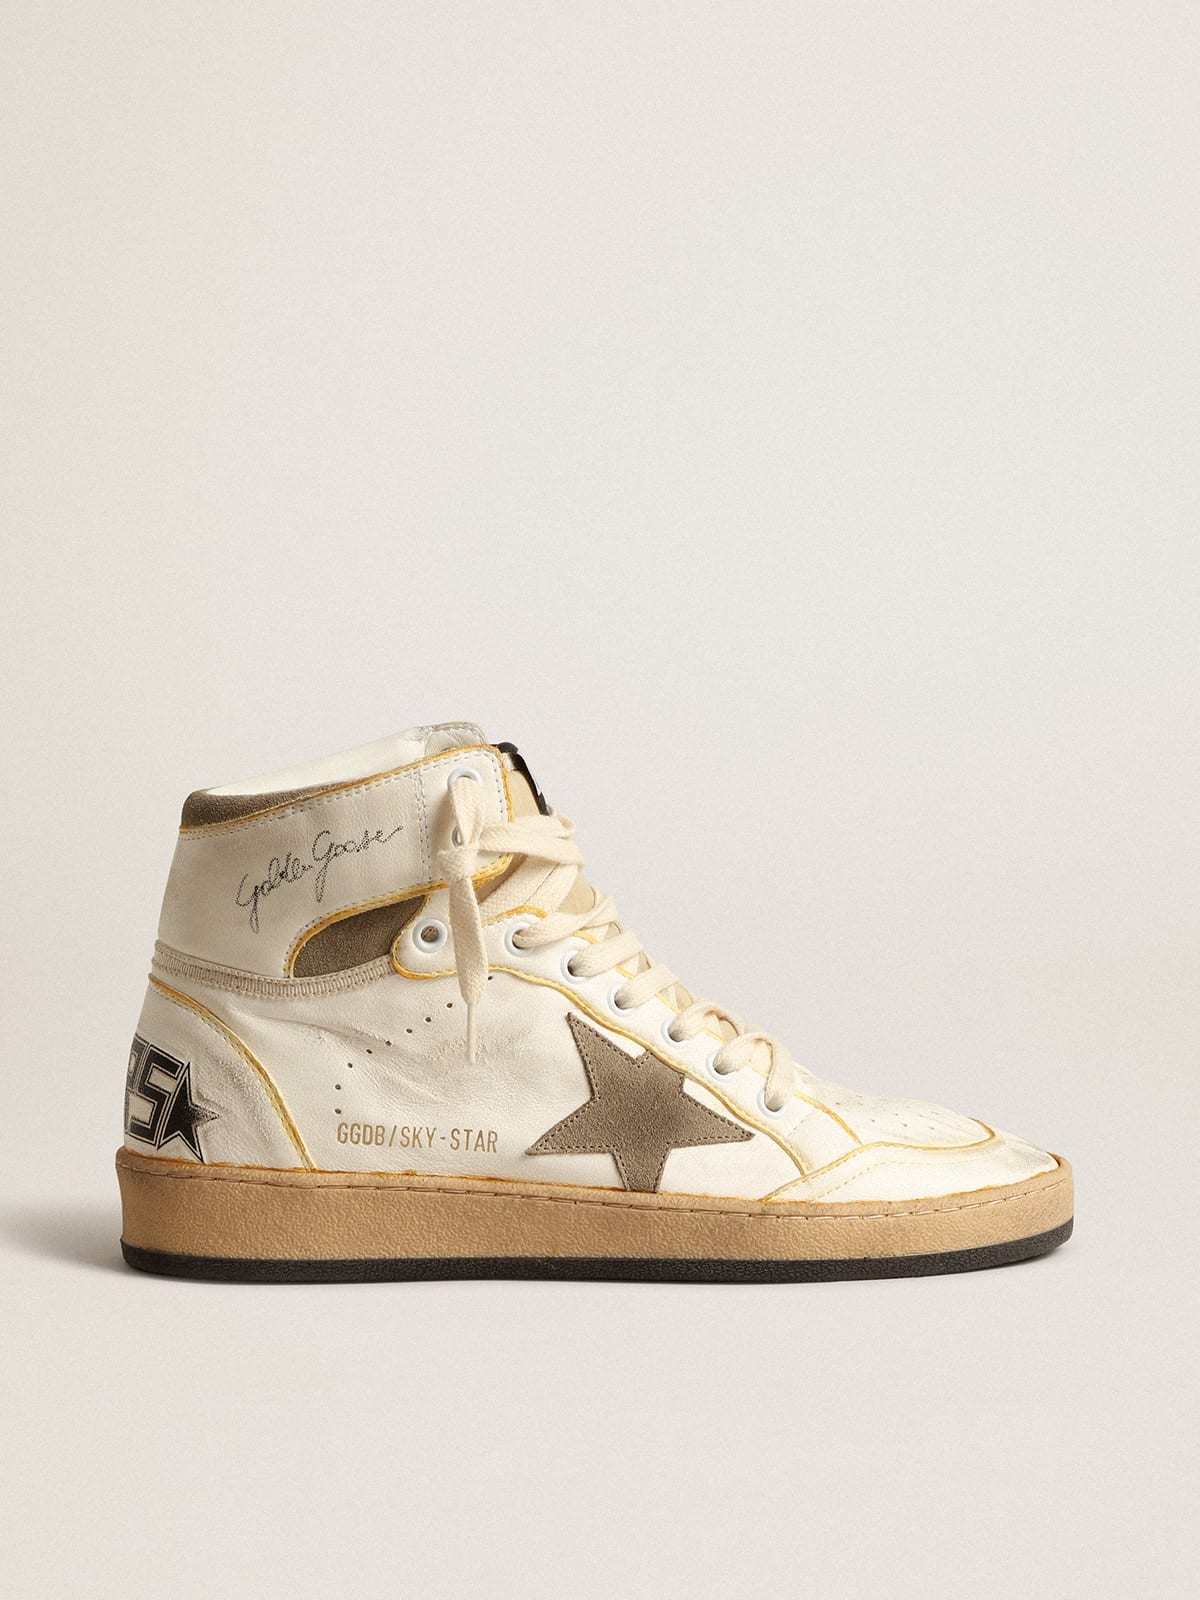 Women's Sky-Star in white nappa leather with dove-gray suede star